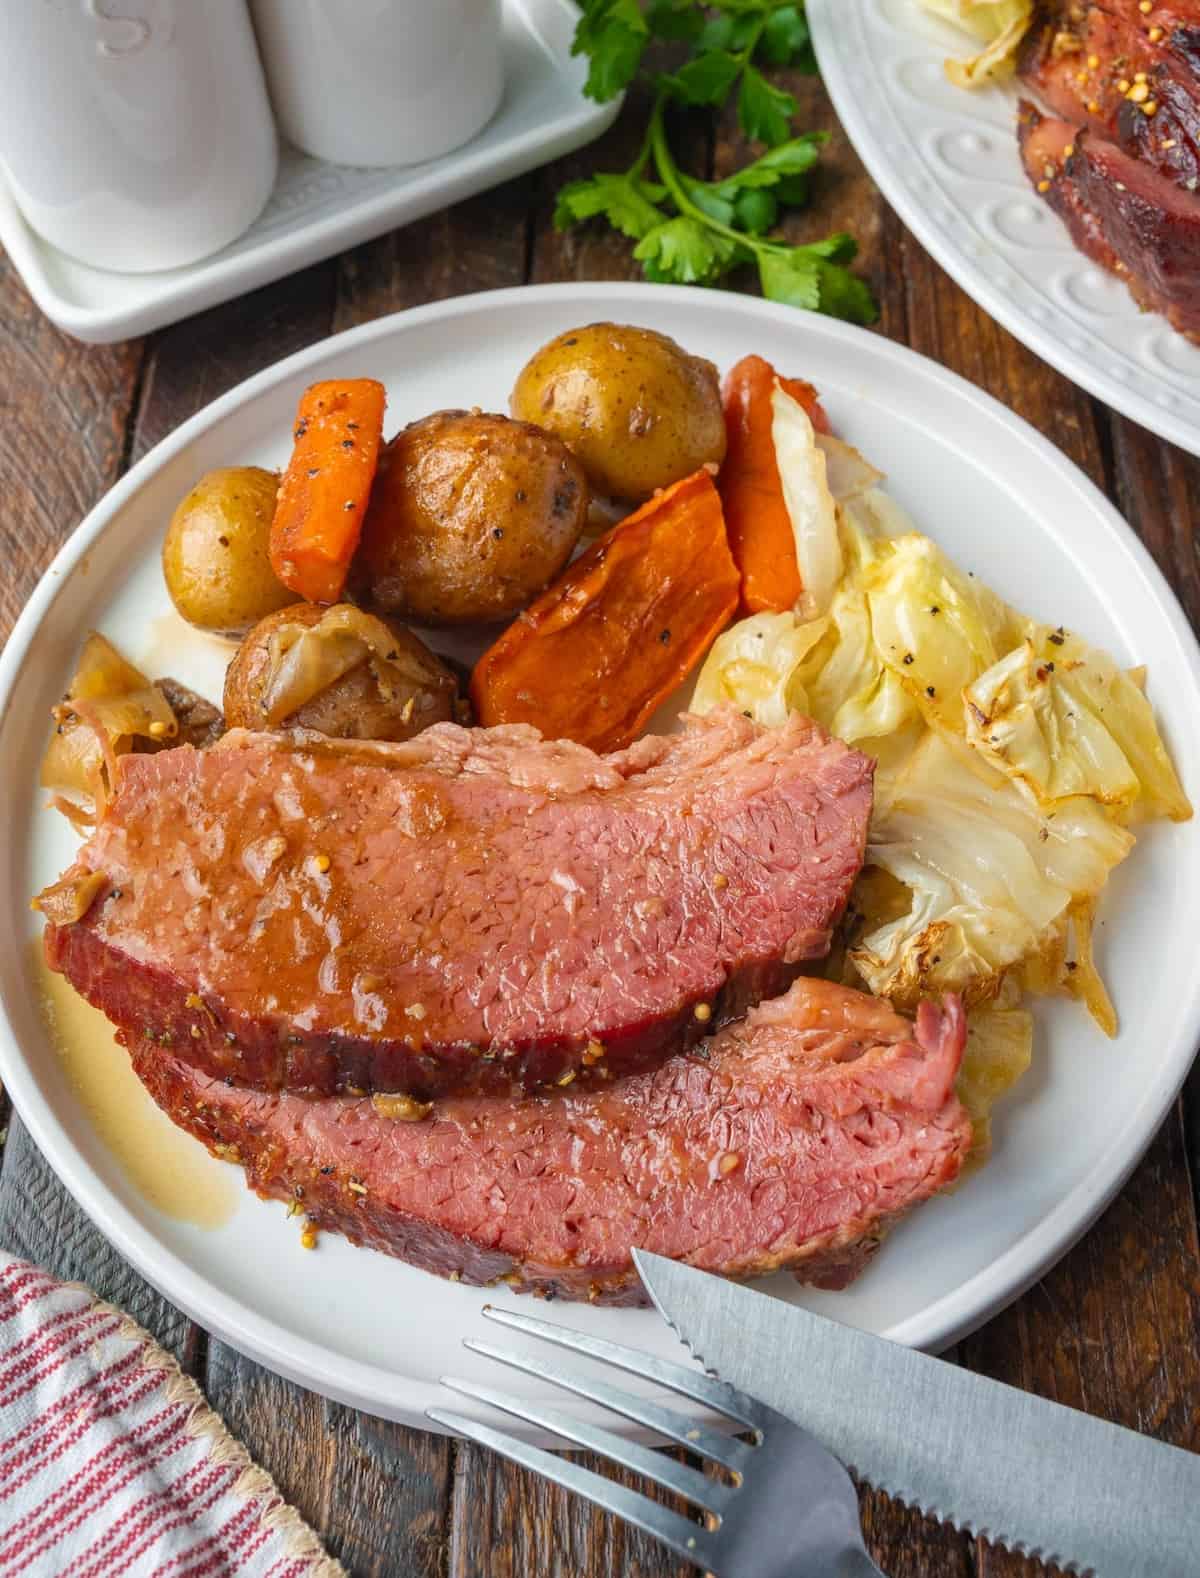 Corned beef on a plate with vegetables.